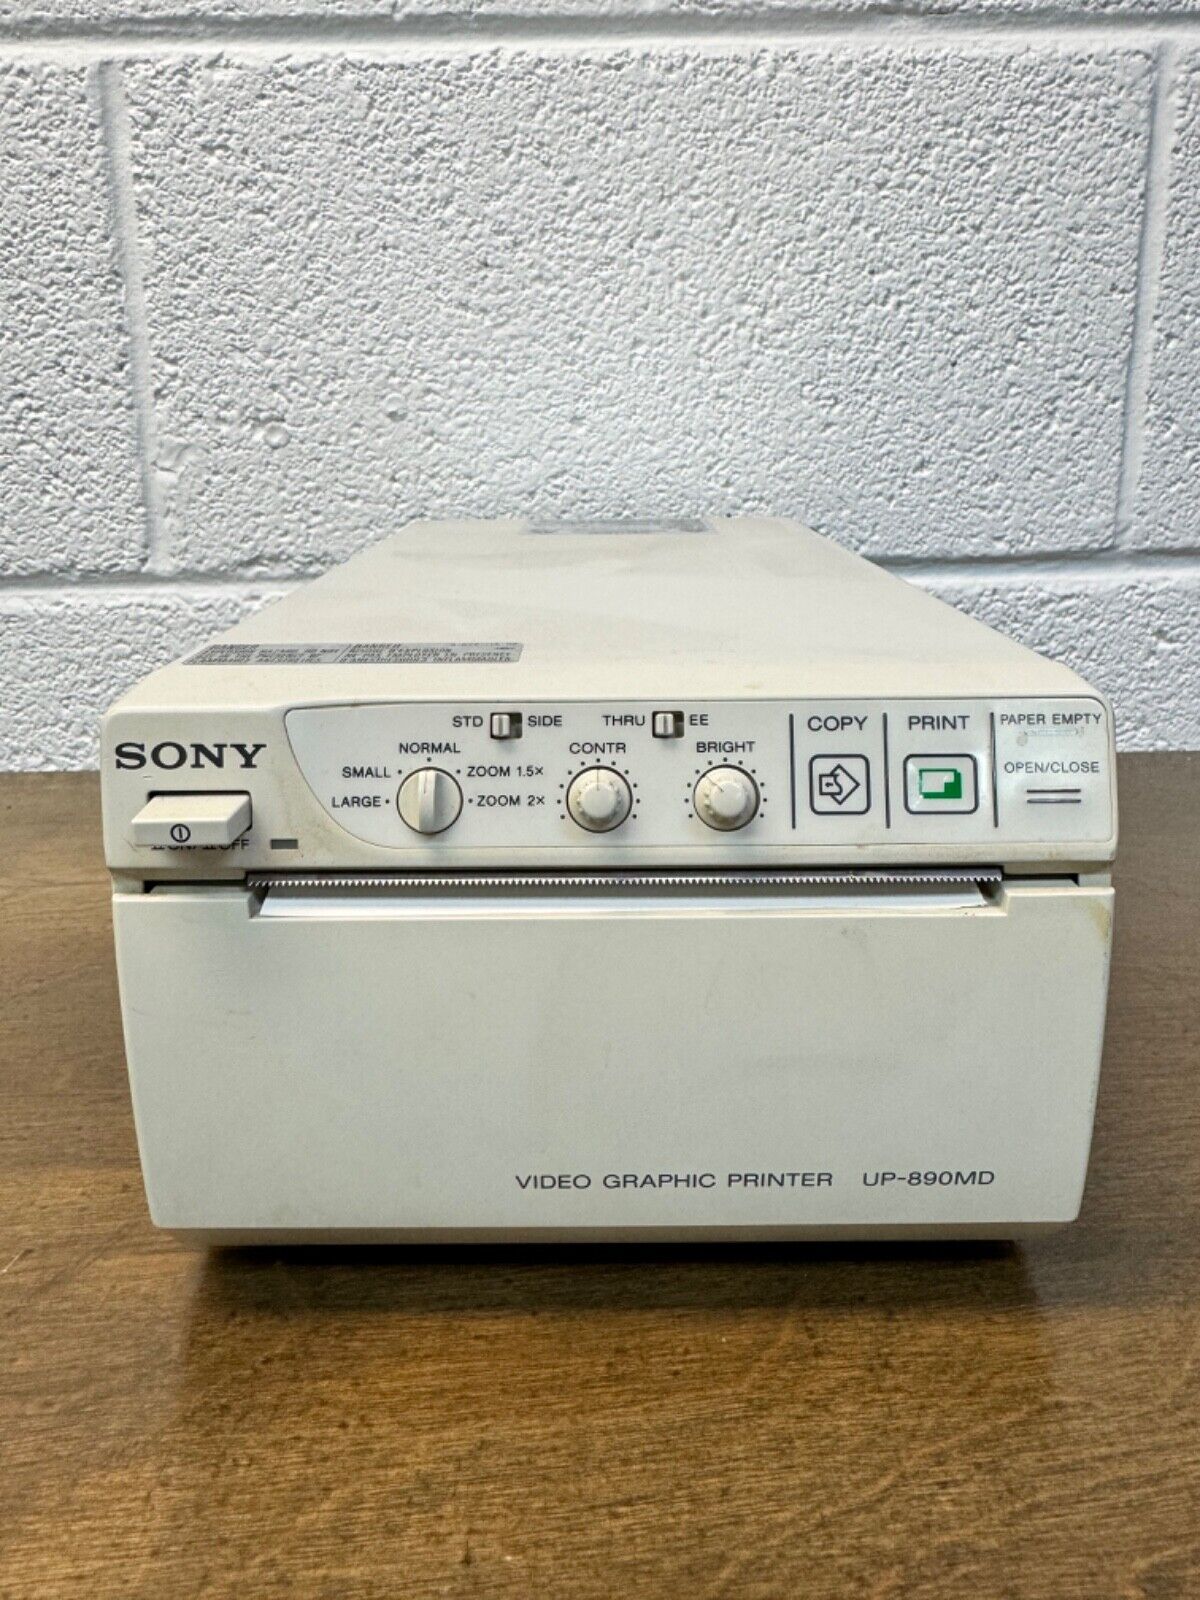 SONY UP-890MD VIDEO GRAPHIC PRINTER